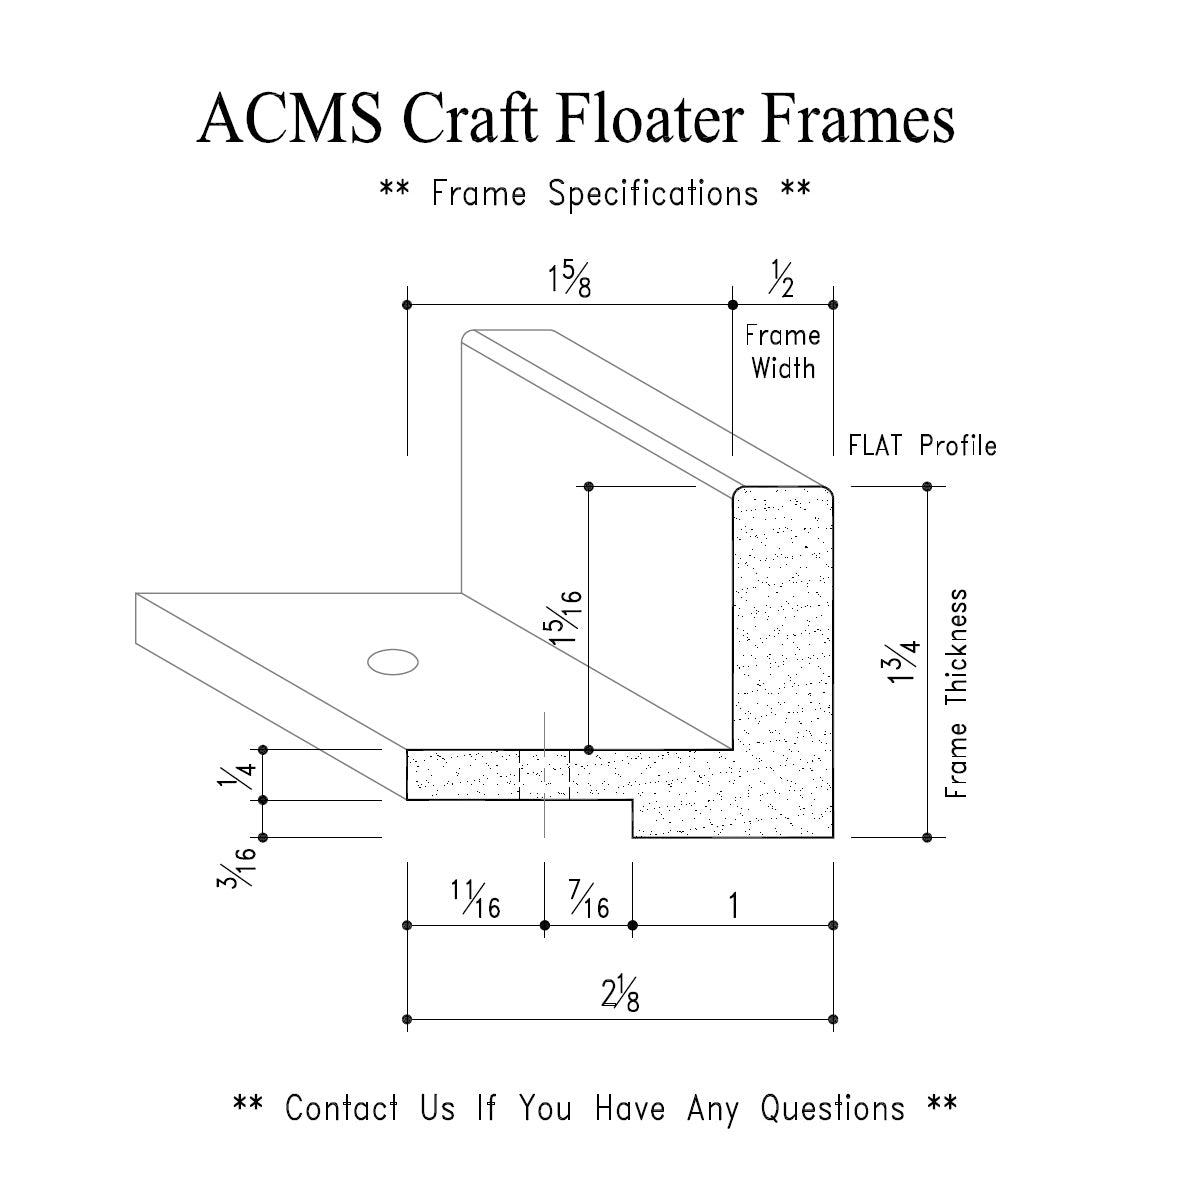 ACMS Round Craft Floater Frame - For 1 1/4" Thick Artwork - Profile 1/2" FLAT - 1 3/4" Thick Frame